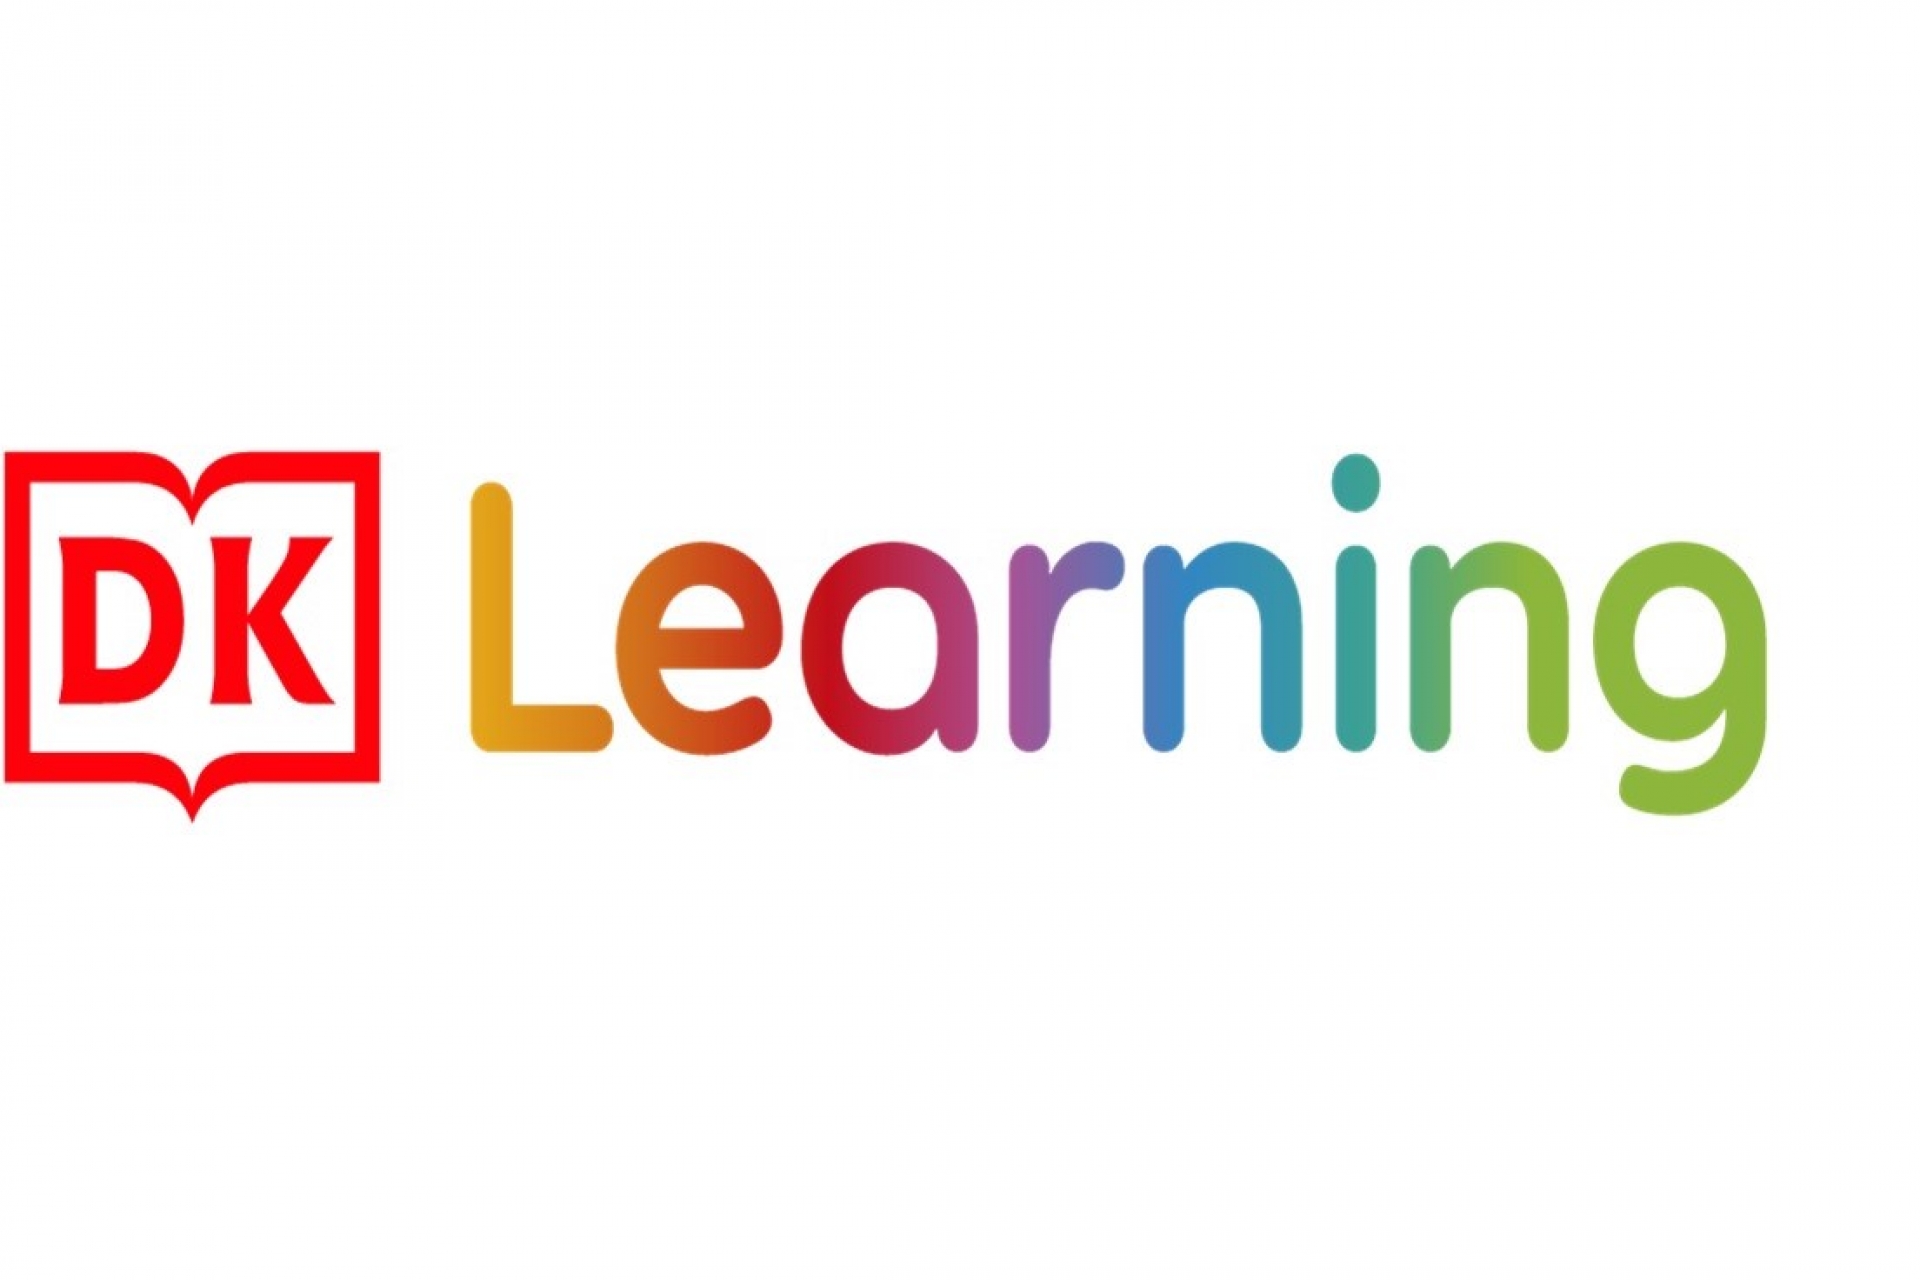 DK Enters Education Market With launch of DK Learning